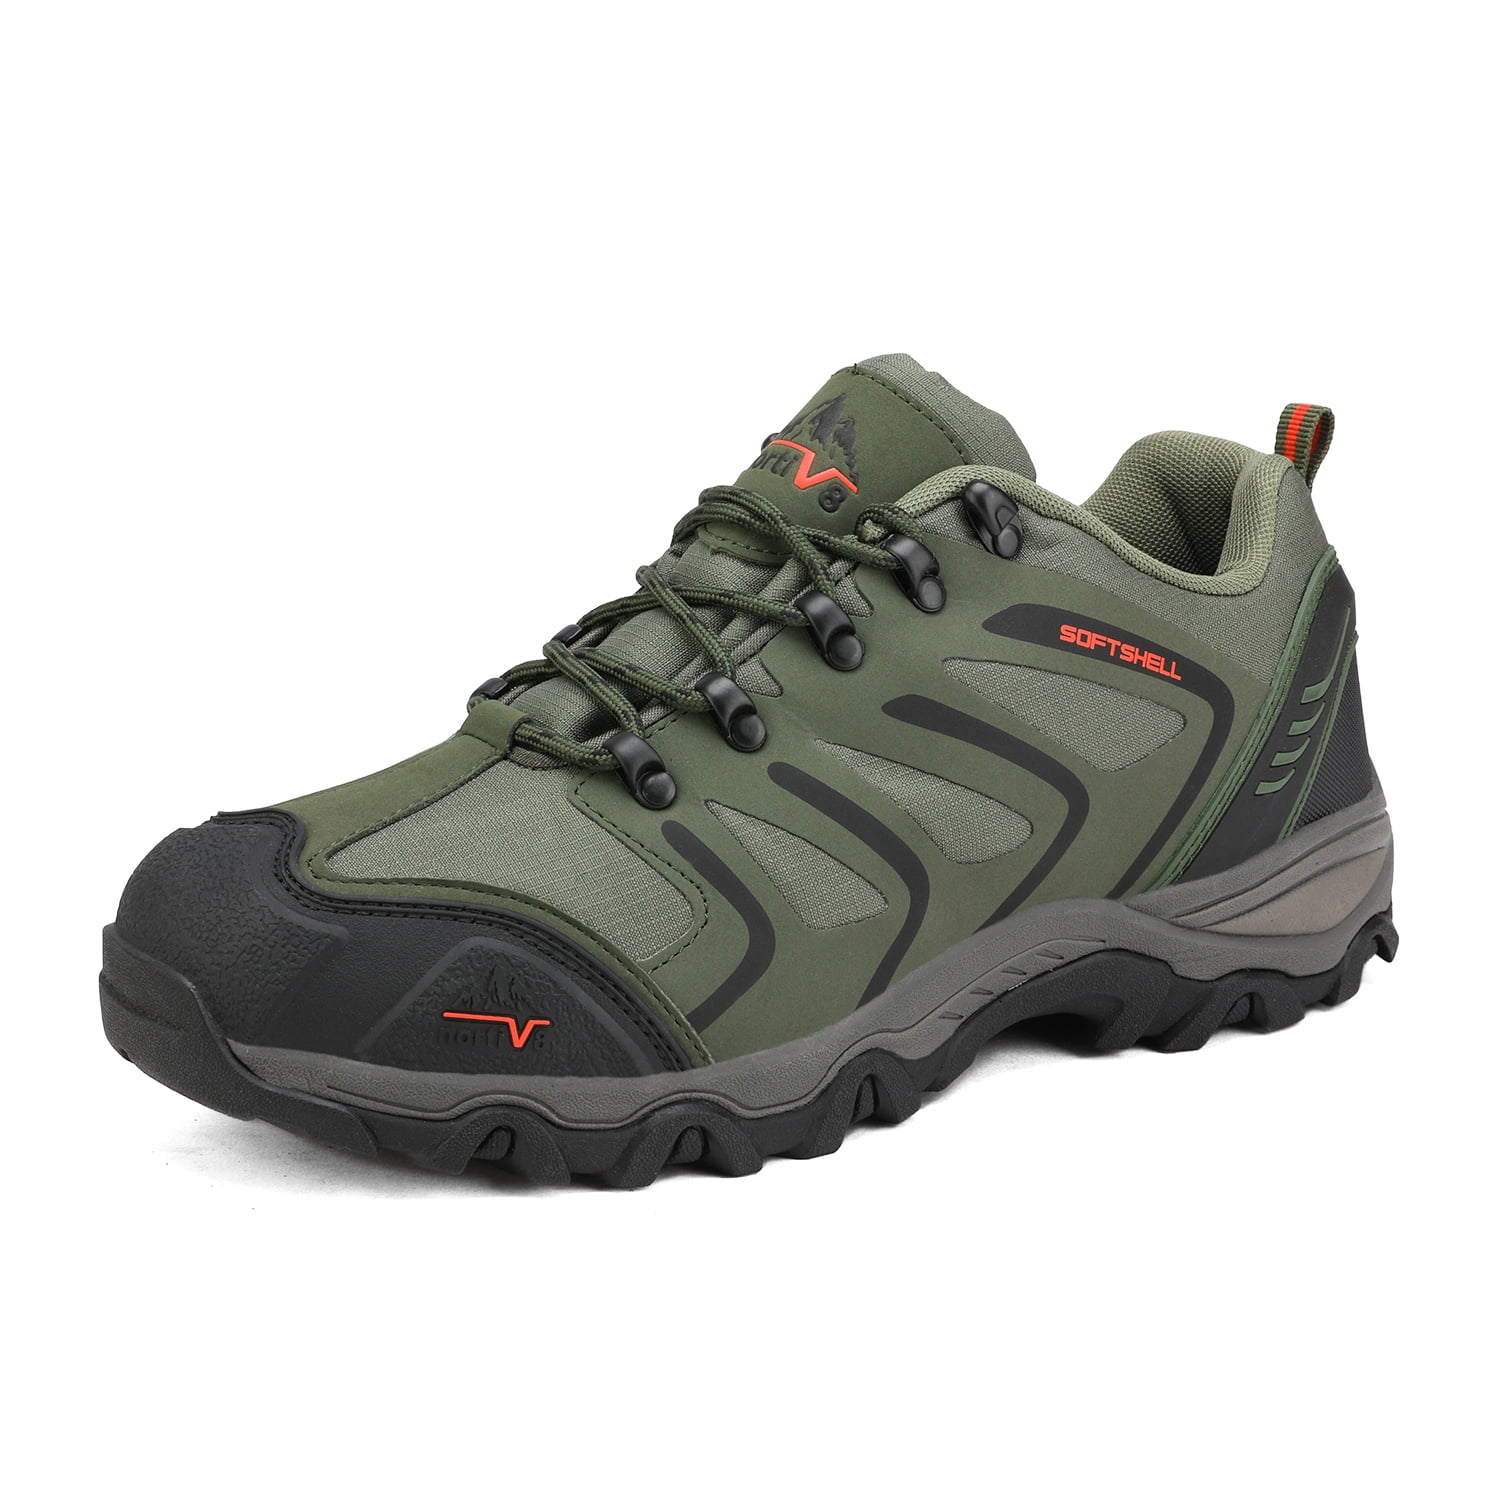 carpeta Levántate Padre fage Nortiv 8 Men's Low Top Waterproof Outdoor Hiking Backpacking Work Boots  Shoes Us 160448_Low Army/Green/Black/Orange Size 6.5 - Walmart.com